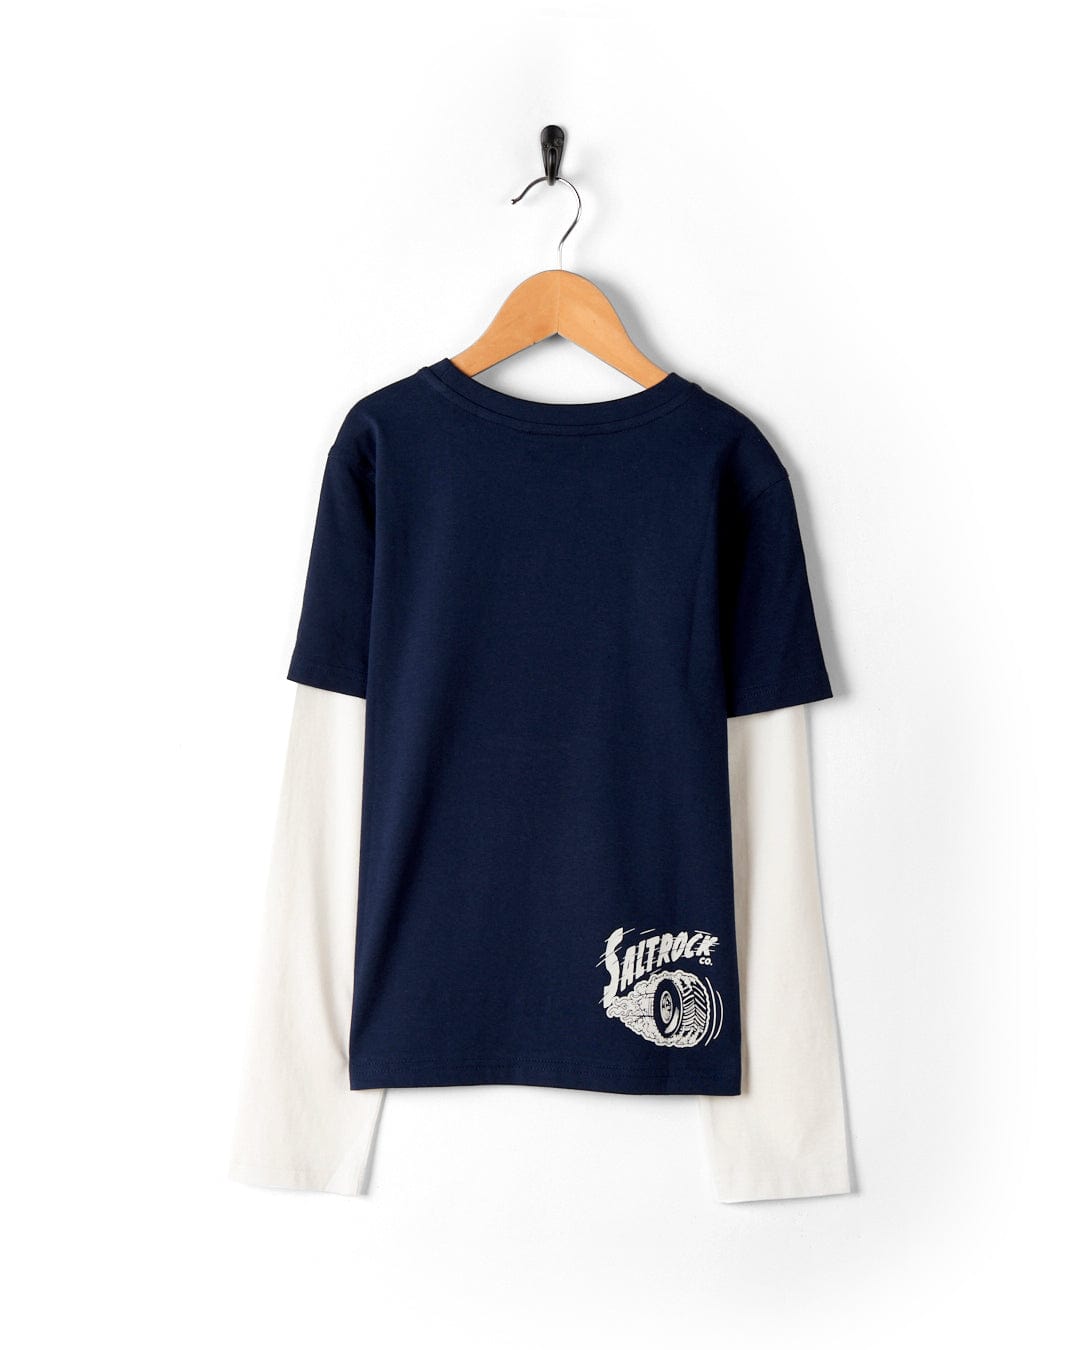 Navy blue and cream raglan t-shirt with Crew Neckline and Saltrock Illustration hanging on a wall-mounted coat hanger.